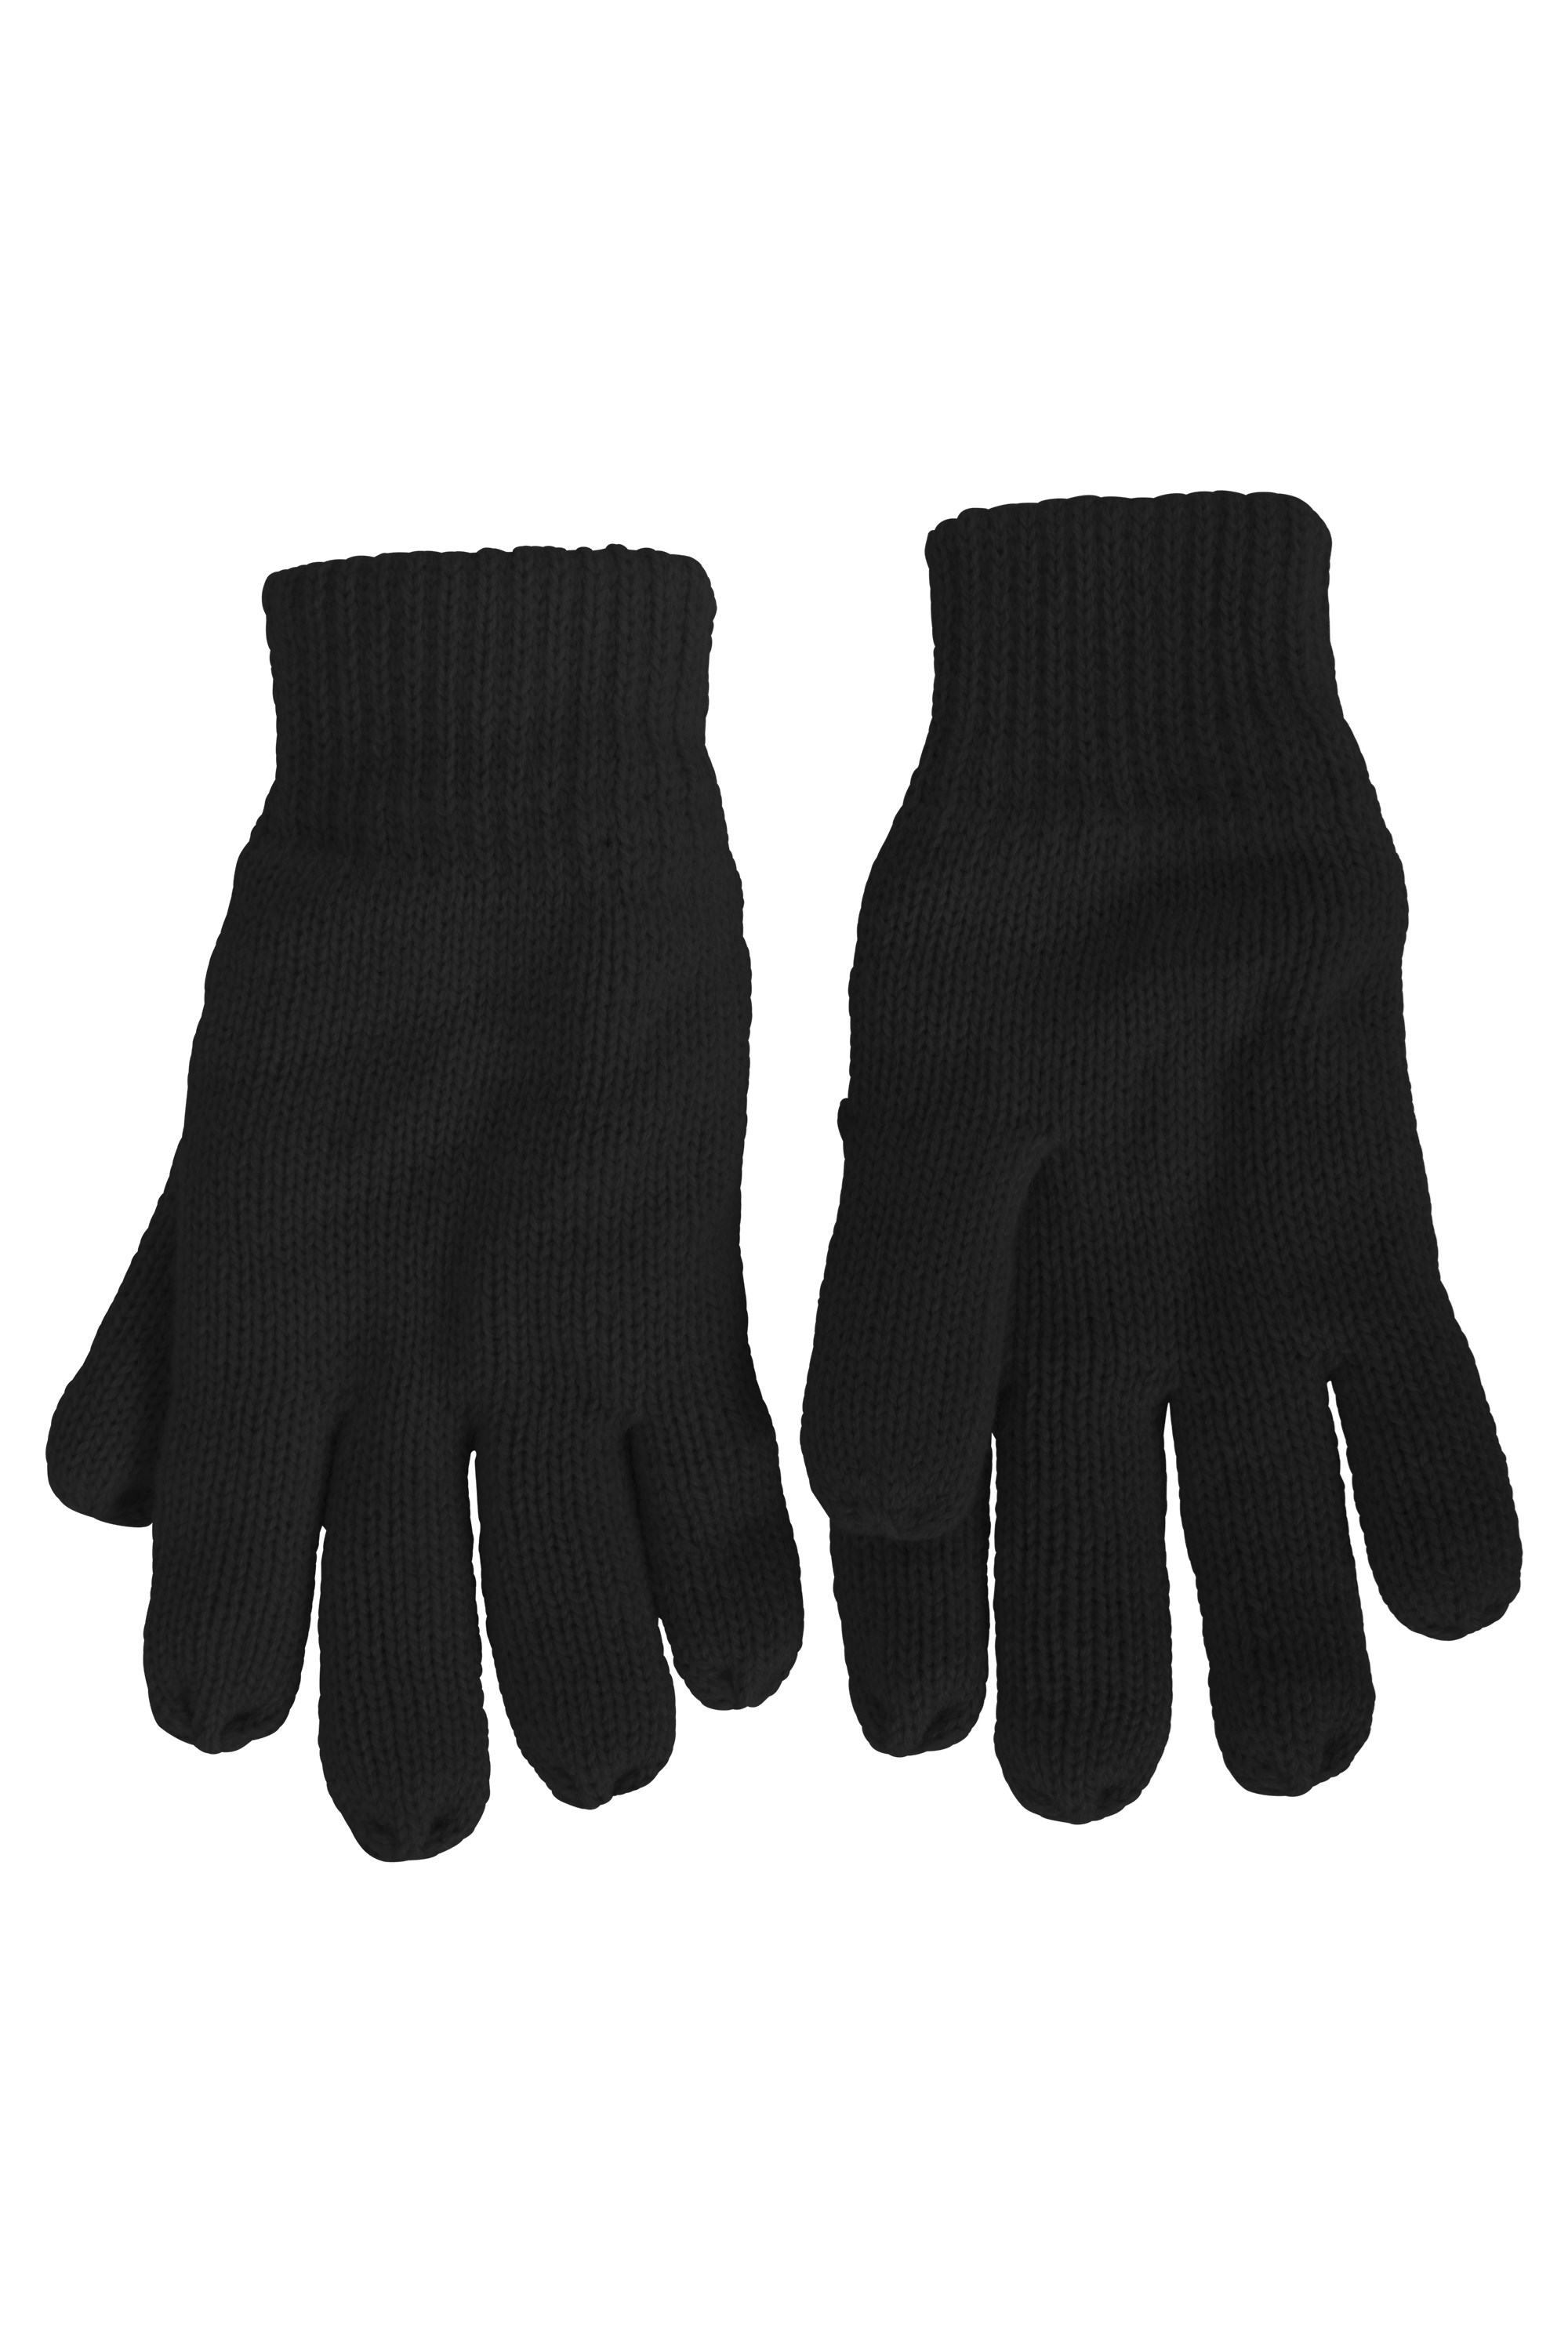 baby thermal gloves